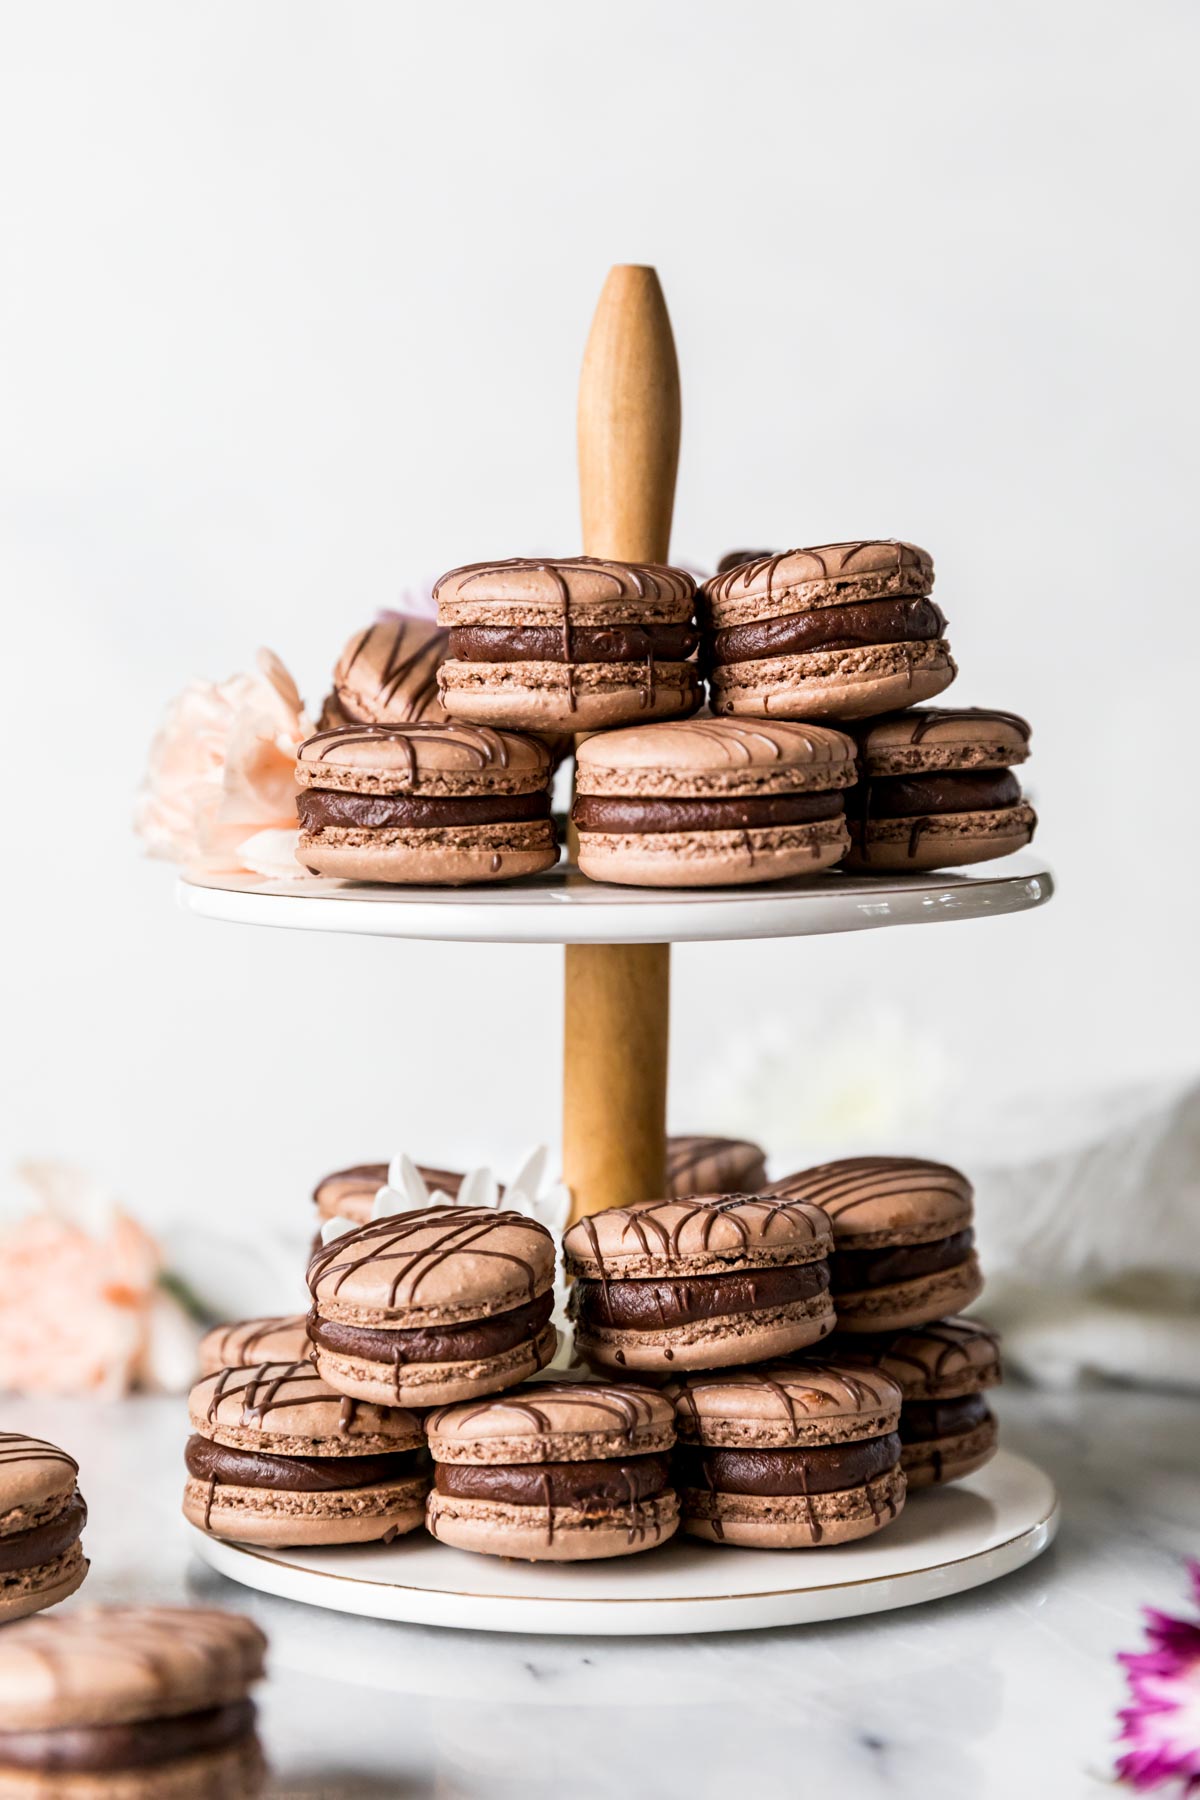 Tiered tray of brown macarons filled with chocolate ganache.